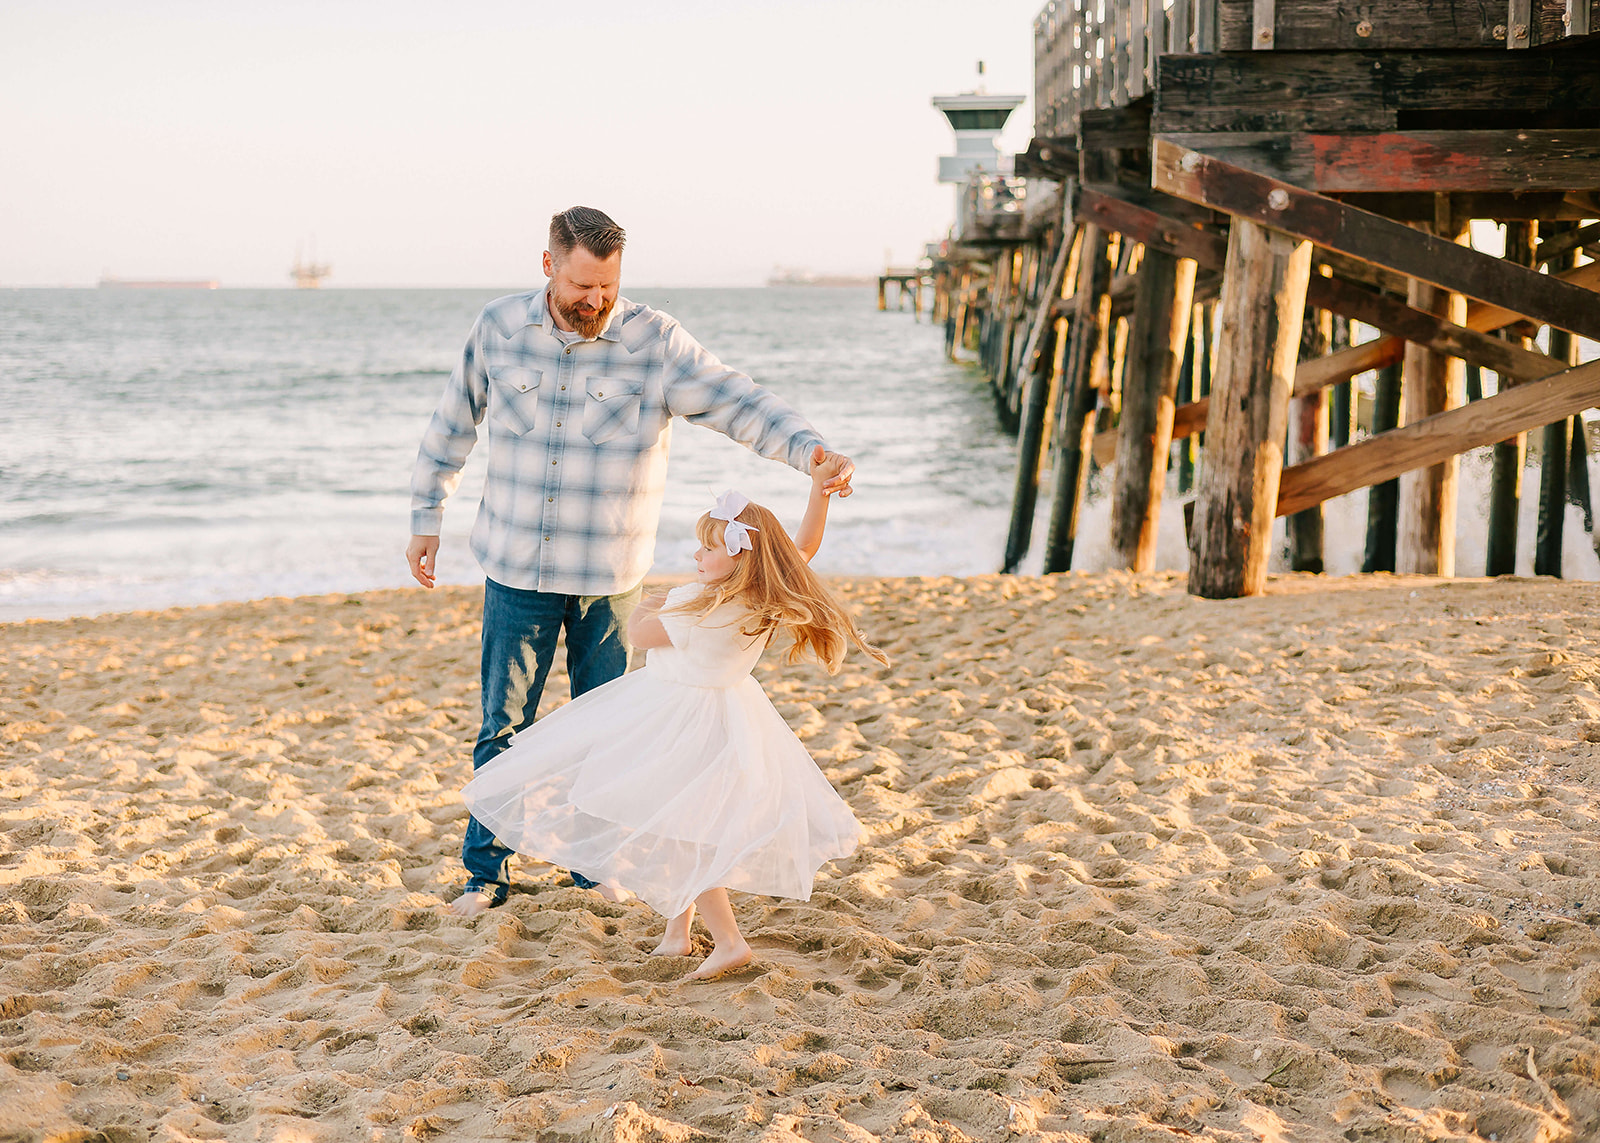 A father in blue flannel dances with his young daughter in a white dress under the pier on the beach Los Angeles Pediatricians